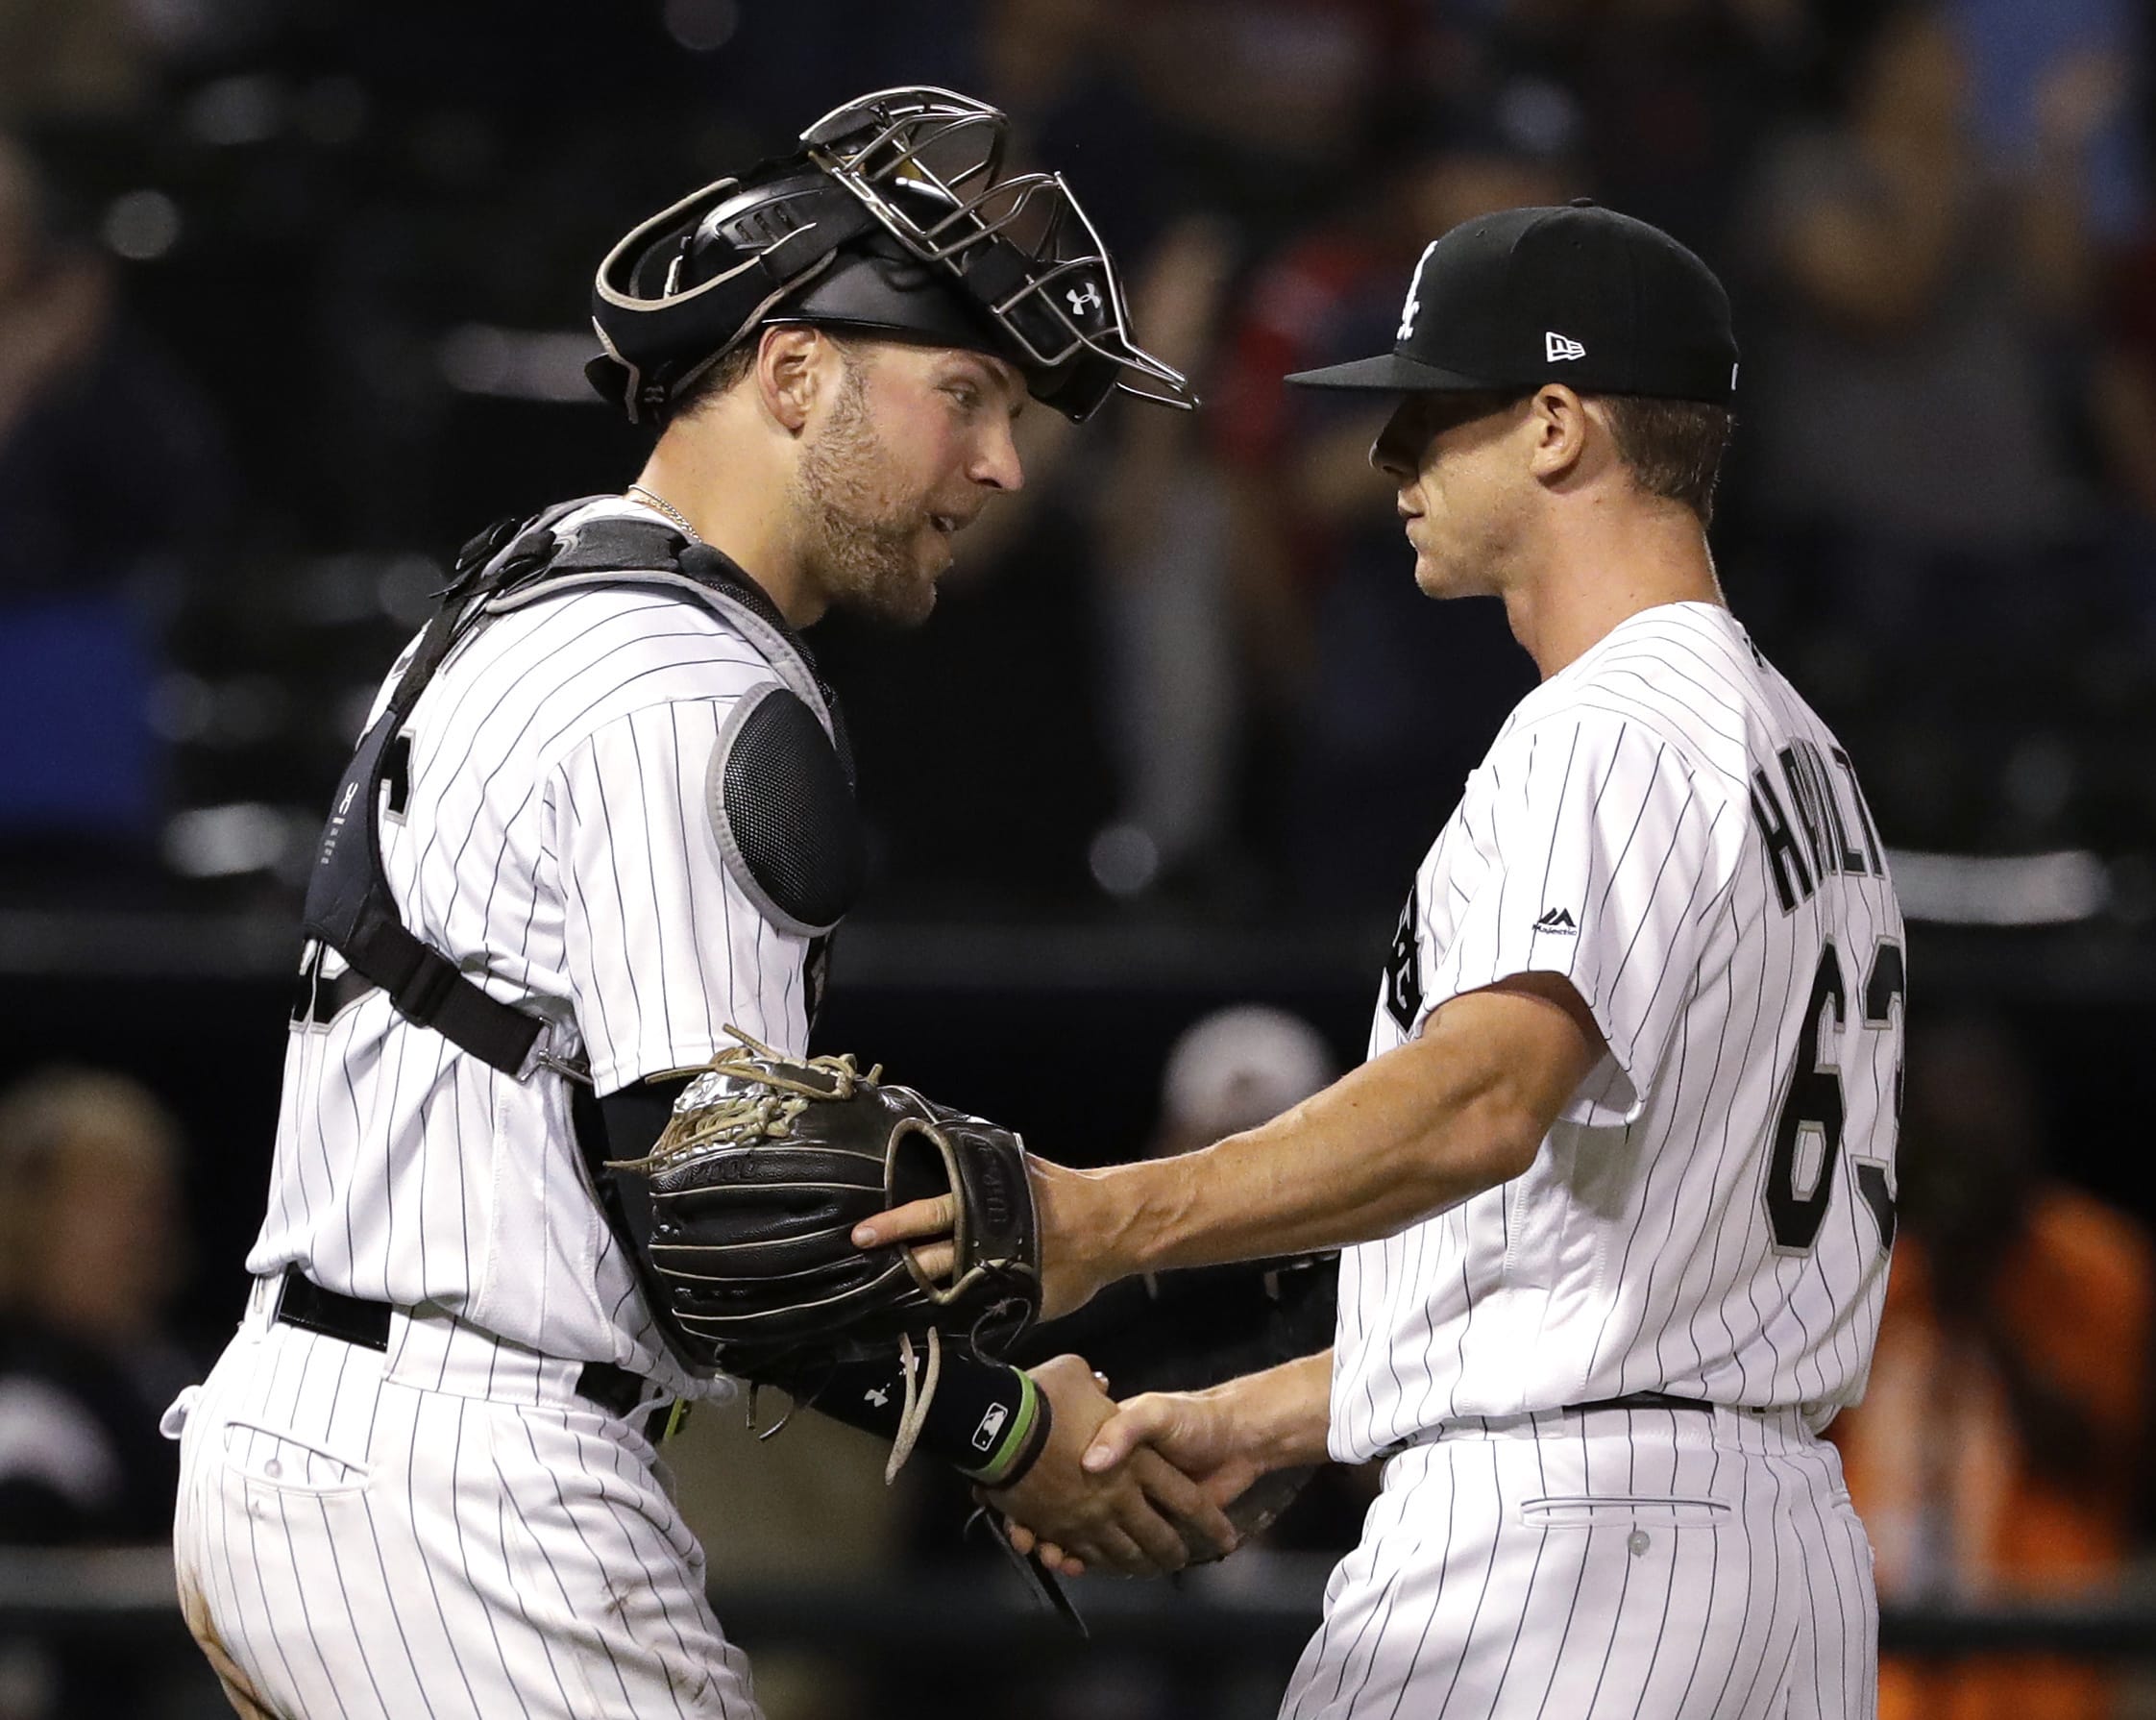 Chicago White Sox relief pitcher Ian Hamilton, right, celebrates with catcher Kevan Smith after the White Sox defeated the Boston Red Sox 6-1 in a baseball game, early Saturday, Sept. 1, 2018, in Chicago. Hamilton, a Skyview High grad, was making his major league debut. (AP Photo/Nam Y.